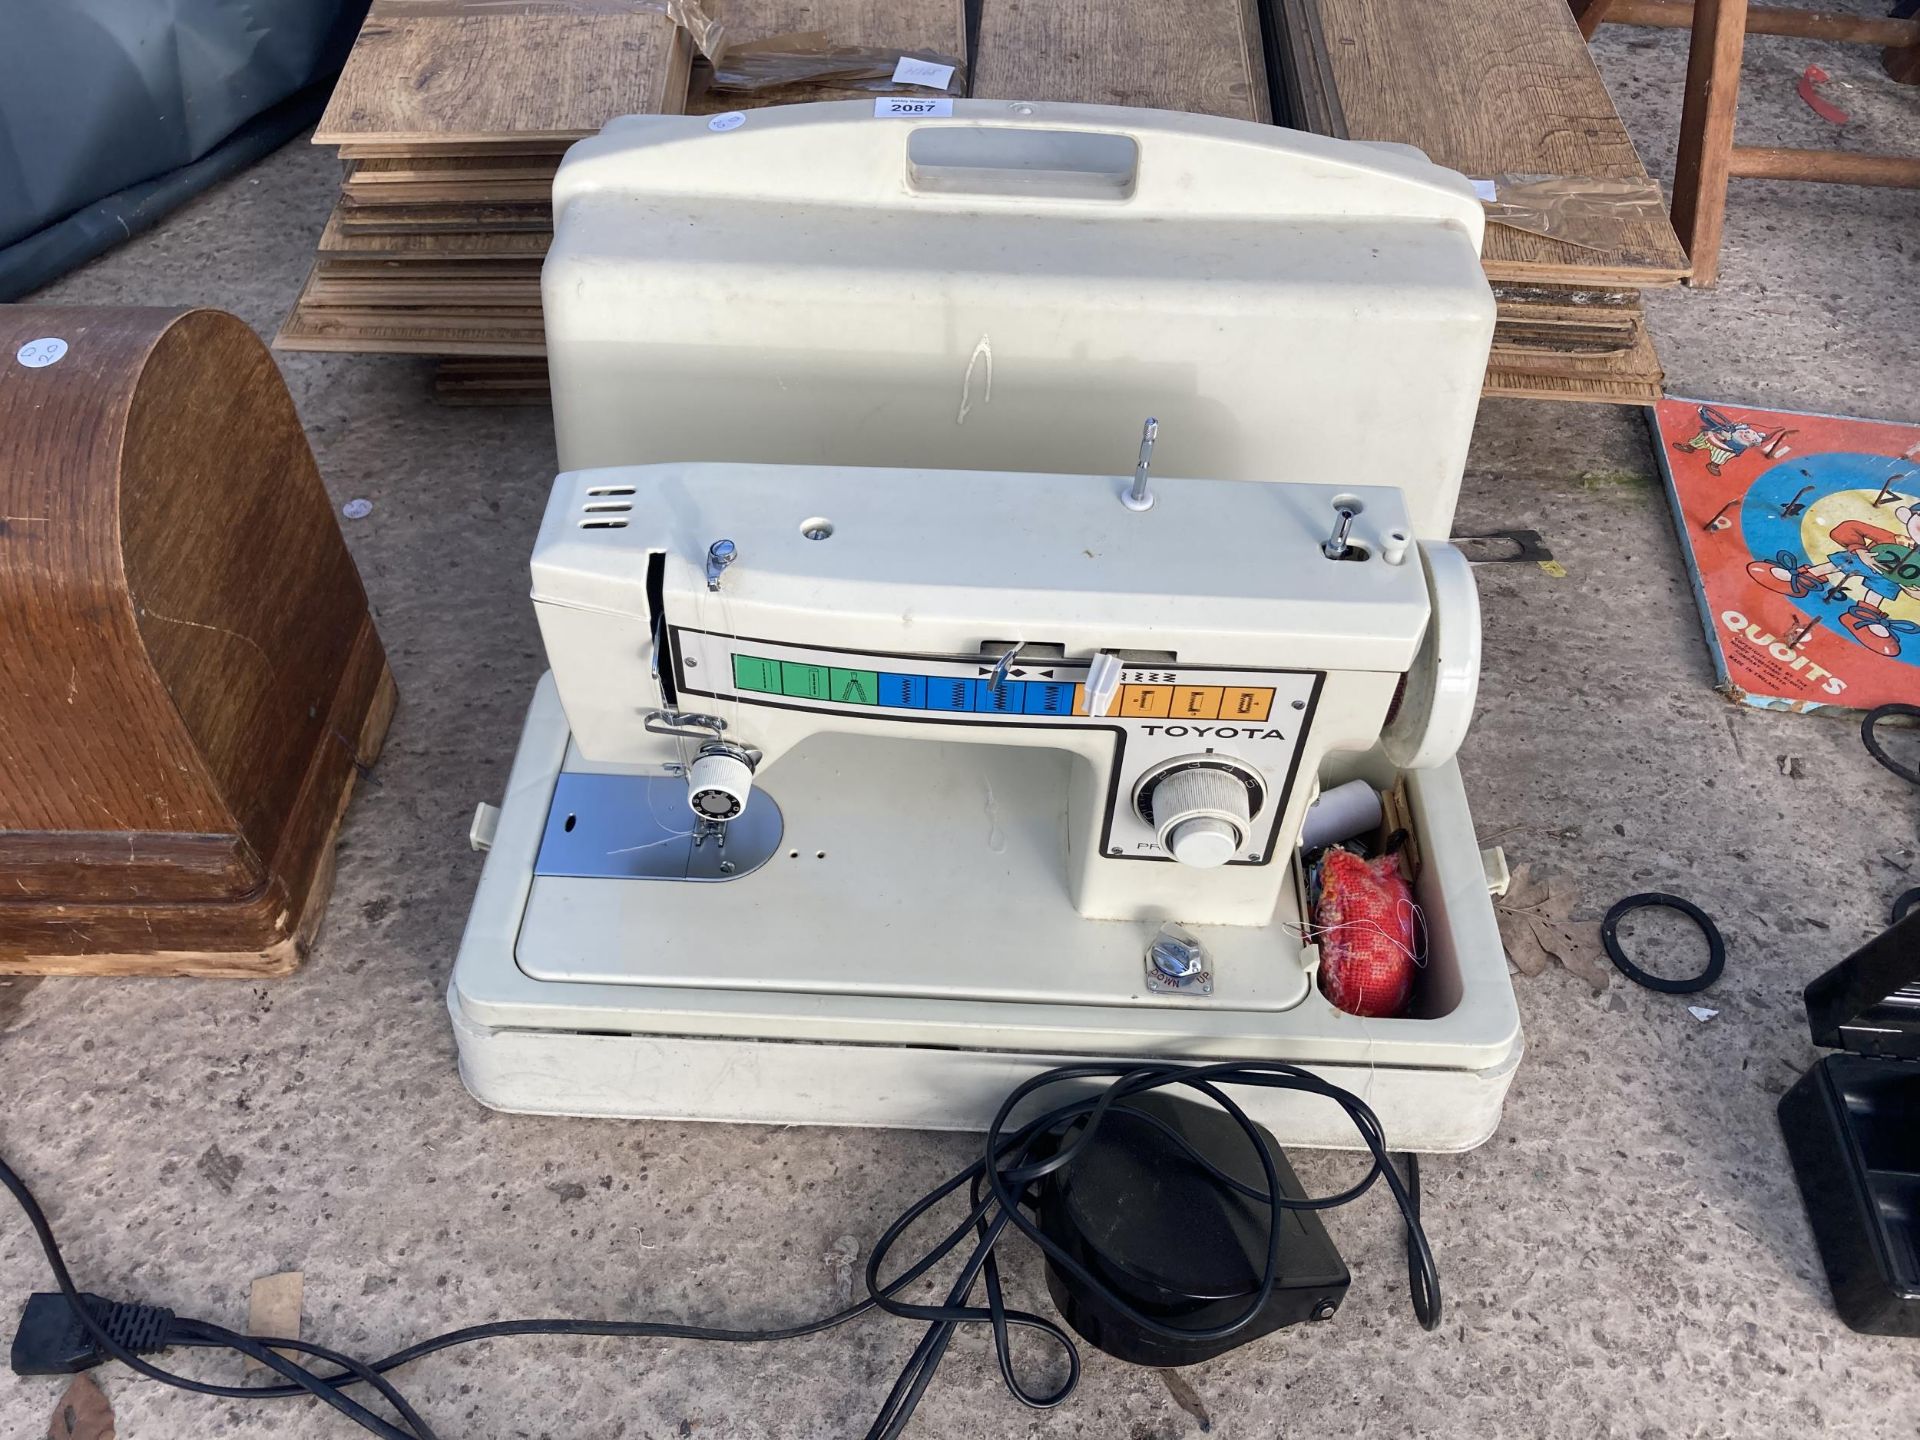 A TOYOTA ELECTRIC SEWING MACHINE WITH FOOT PEDAL AND CARRY CASE